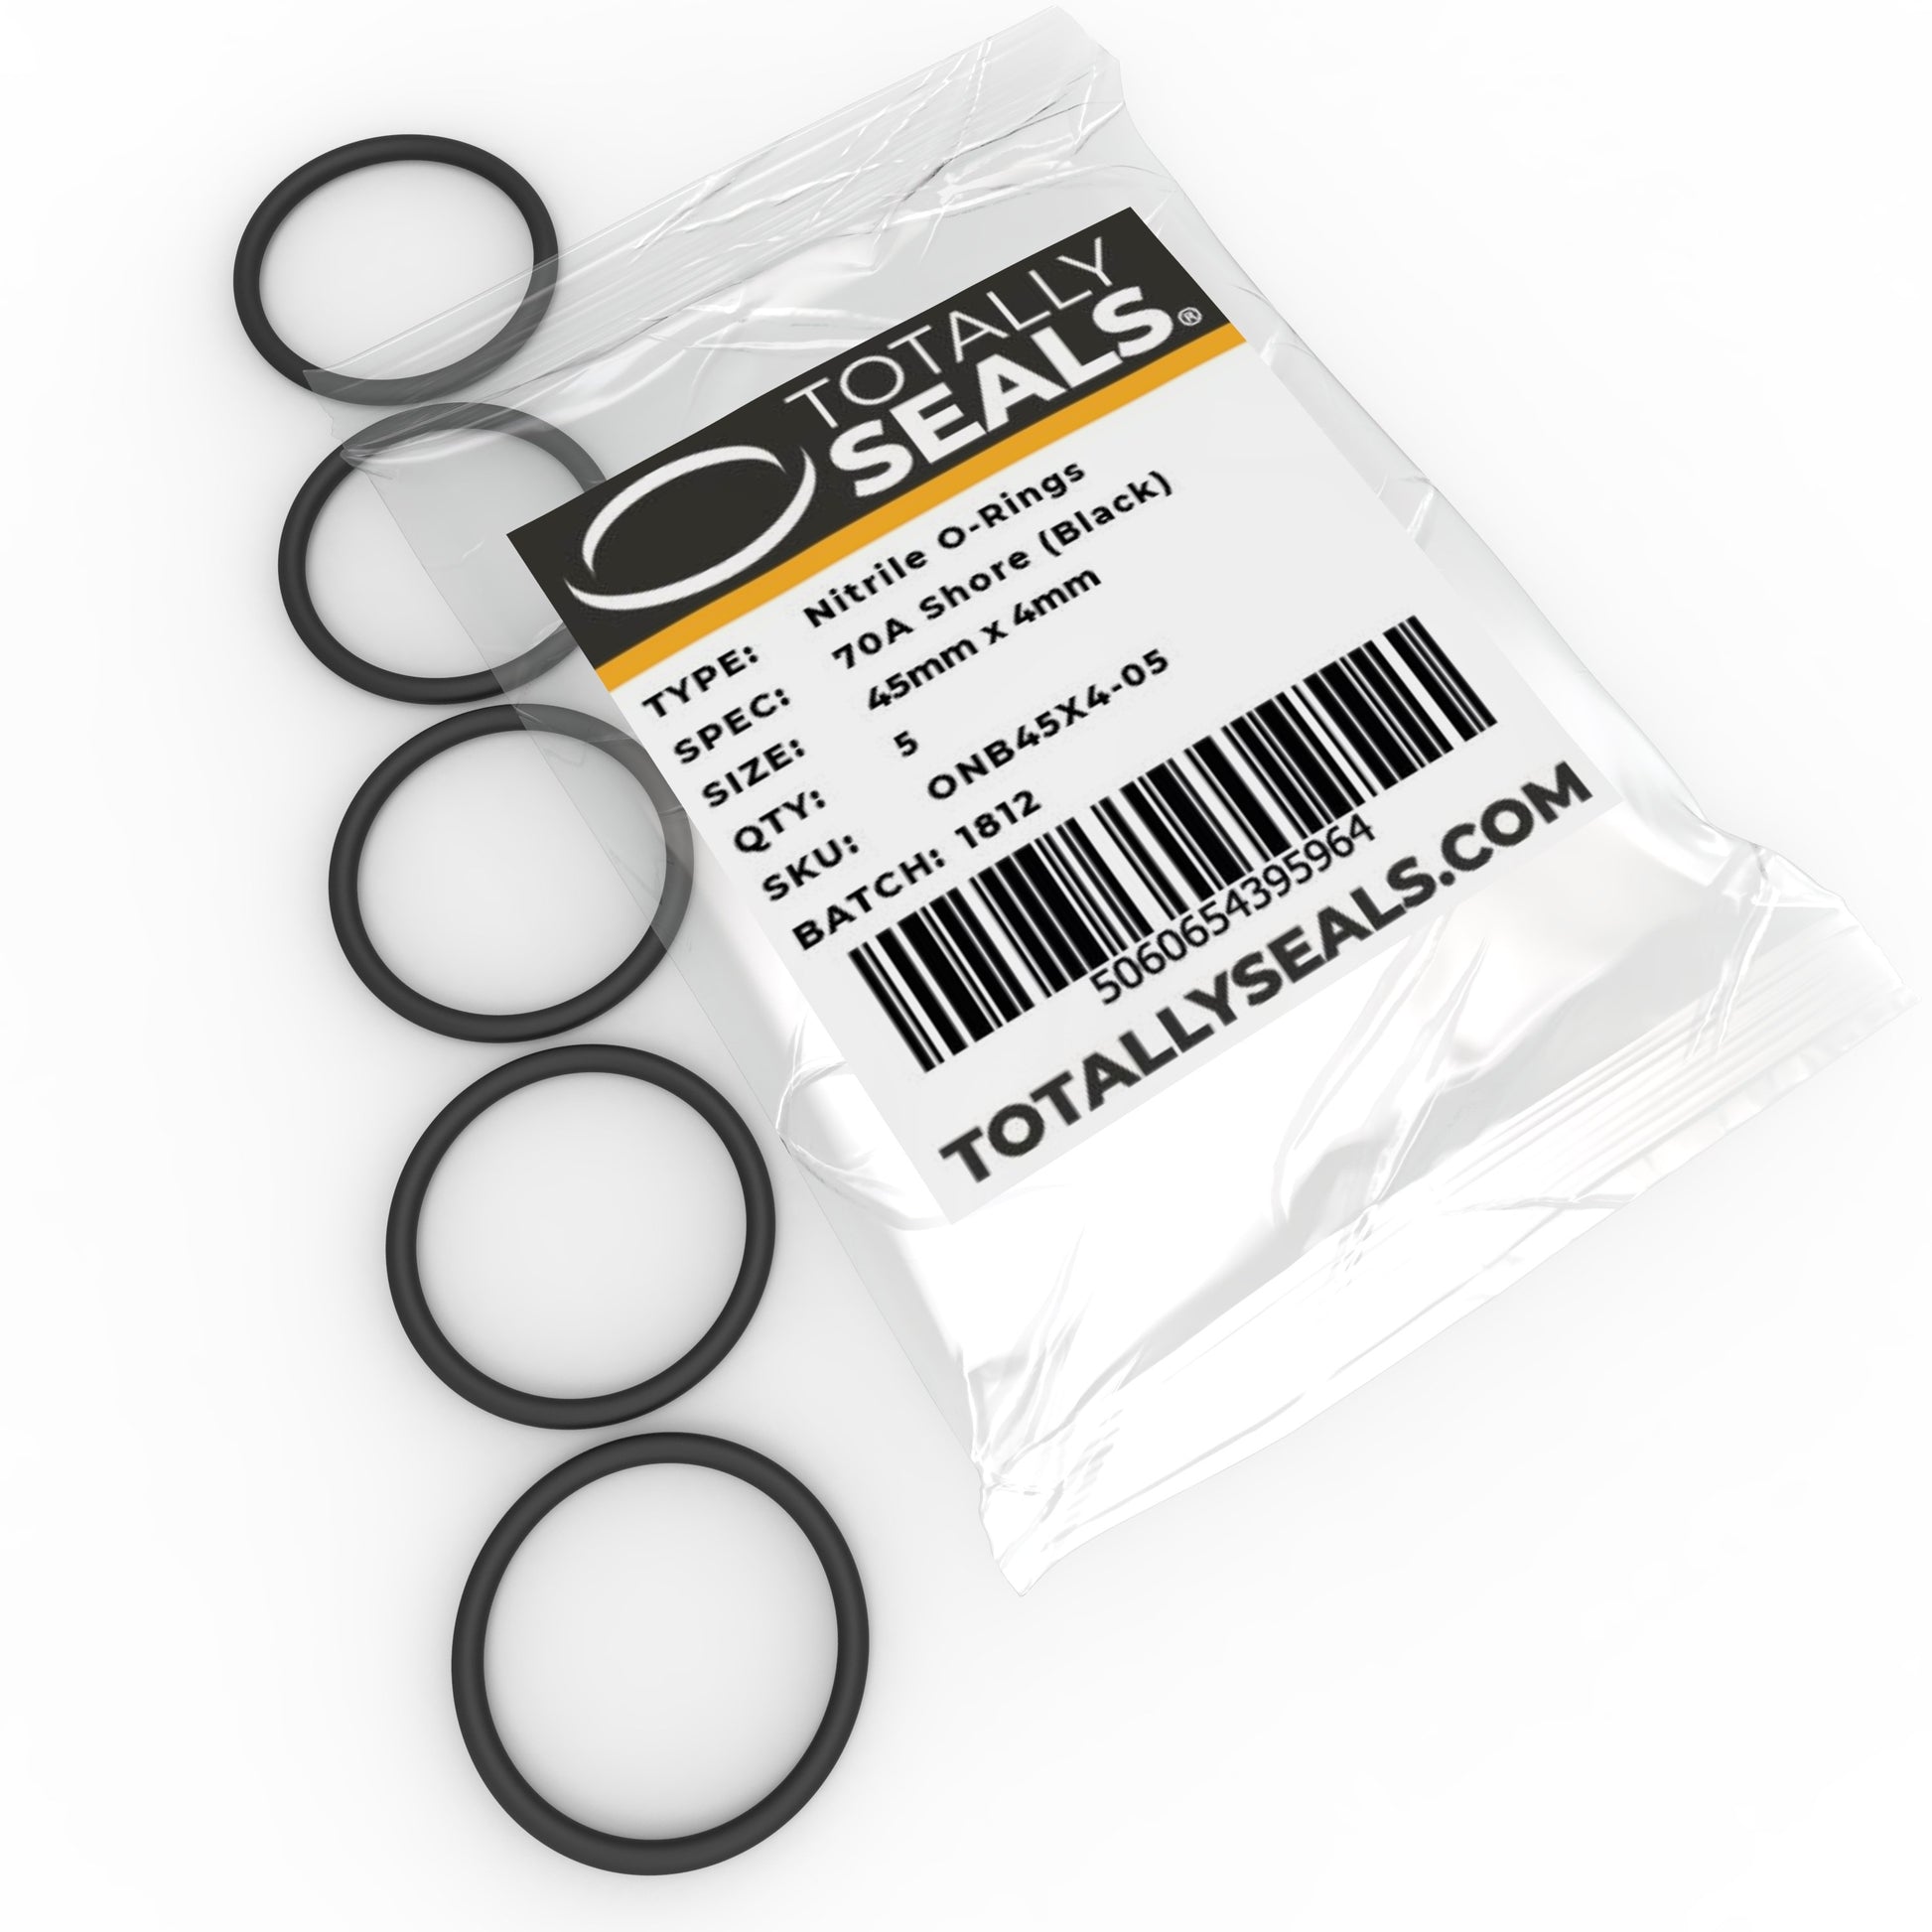 45mm x 4mm (53mm OD) Nitrile O-Rings - Totally Seals®